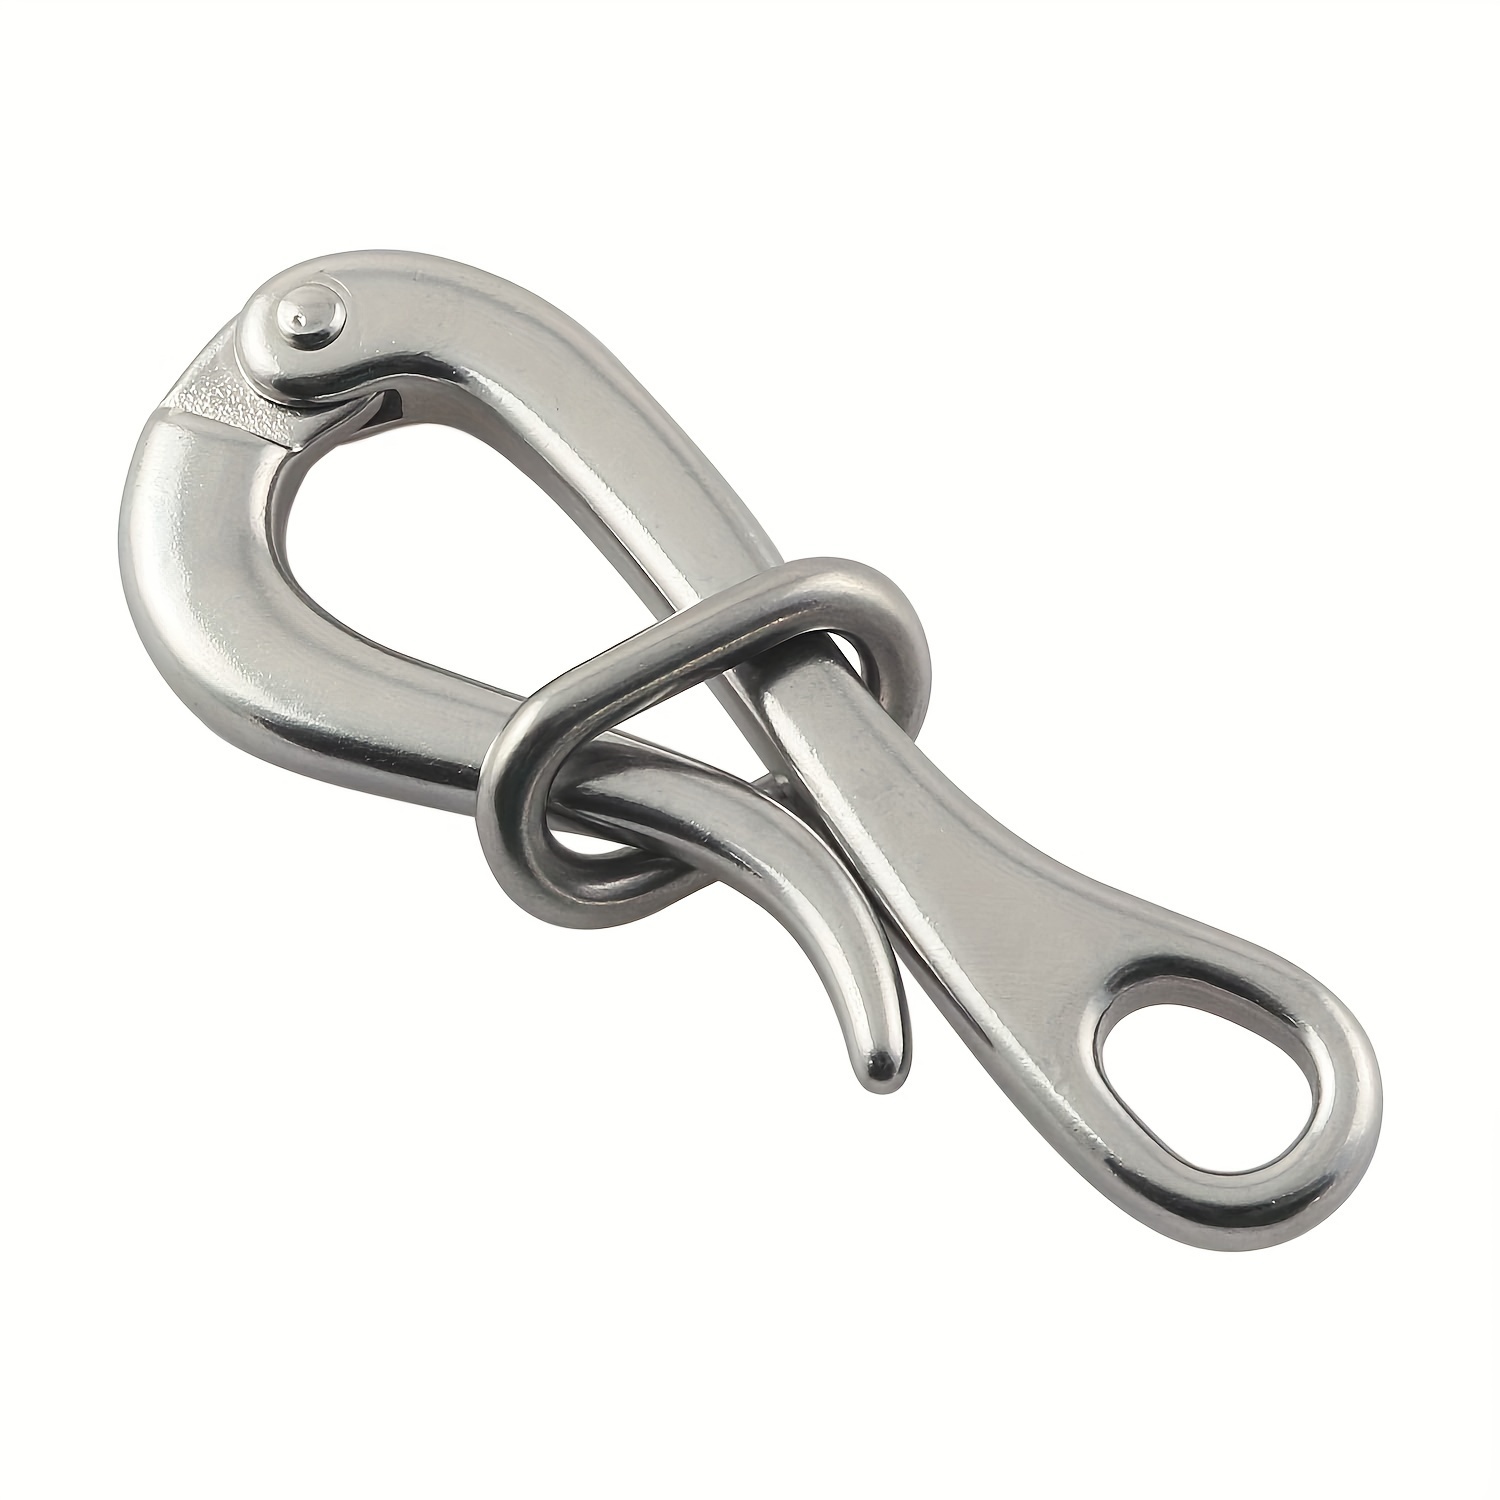 Grappling Hook Folding Claw Folding Grappling Hook Stainless